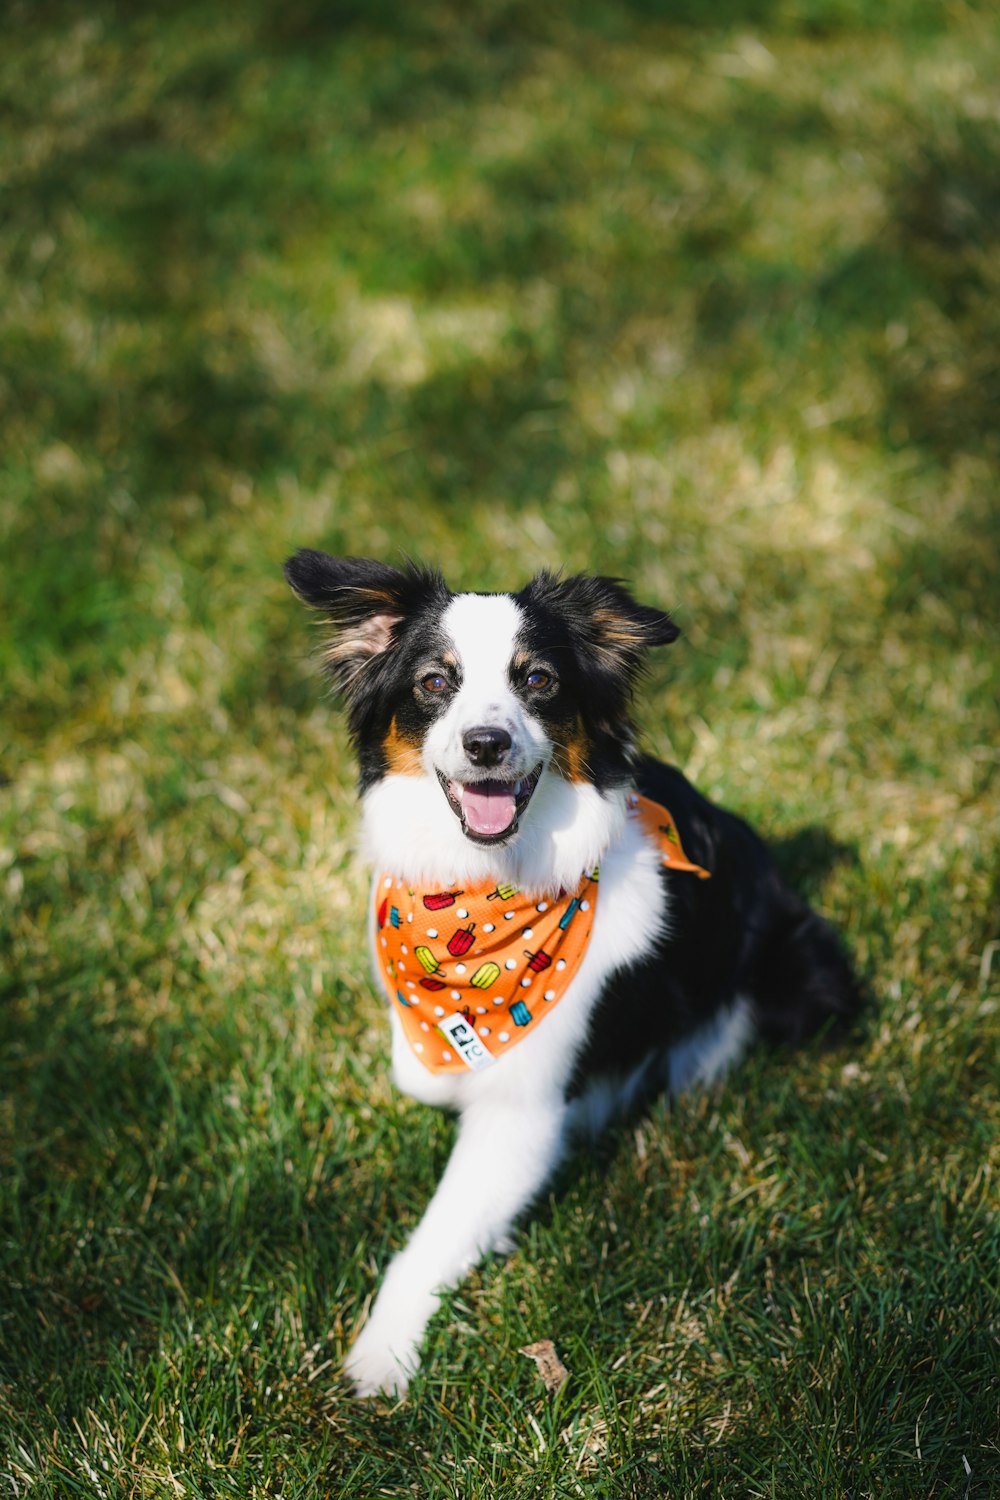 black and white border collie puppy on grass field during daytime